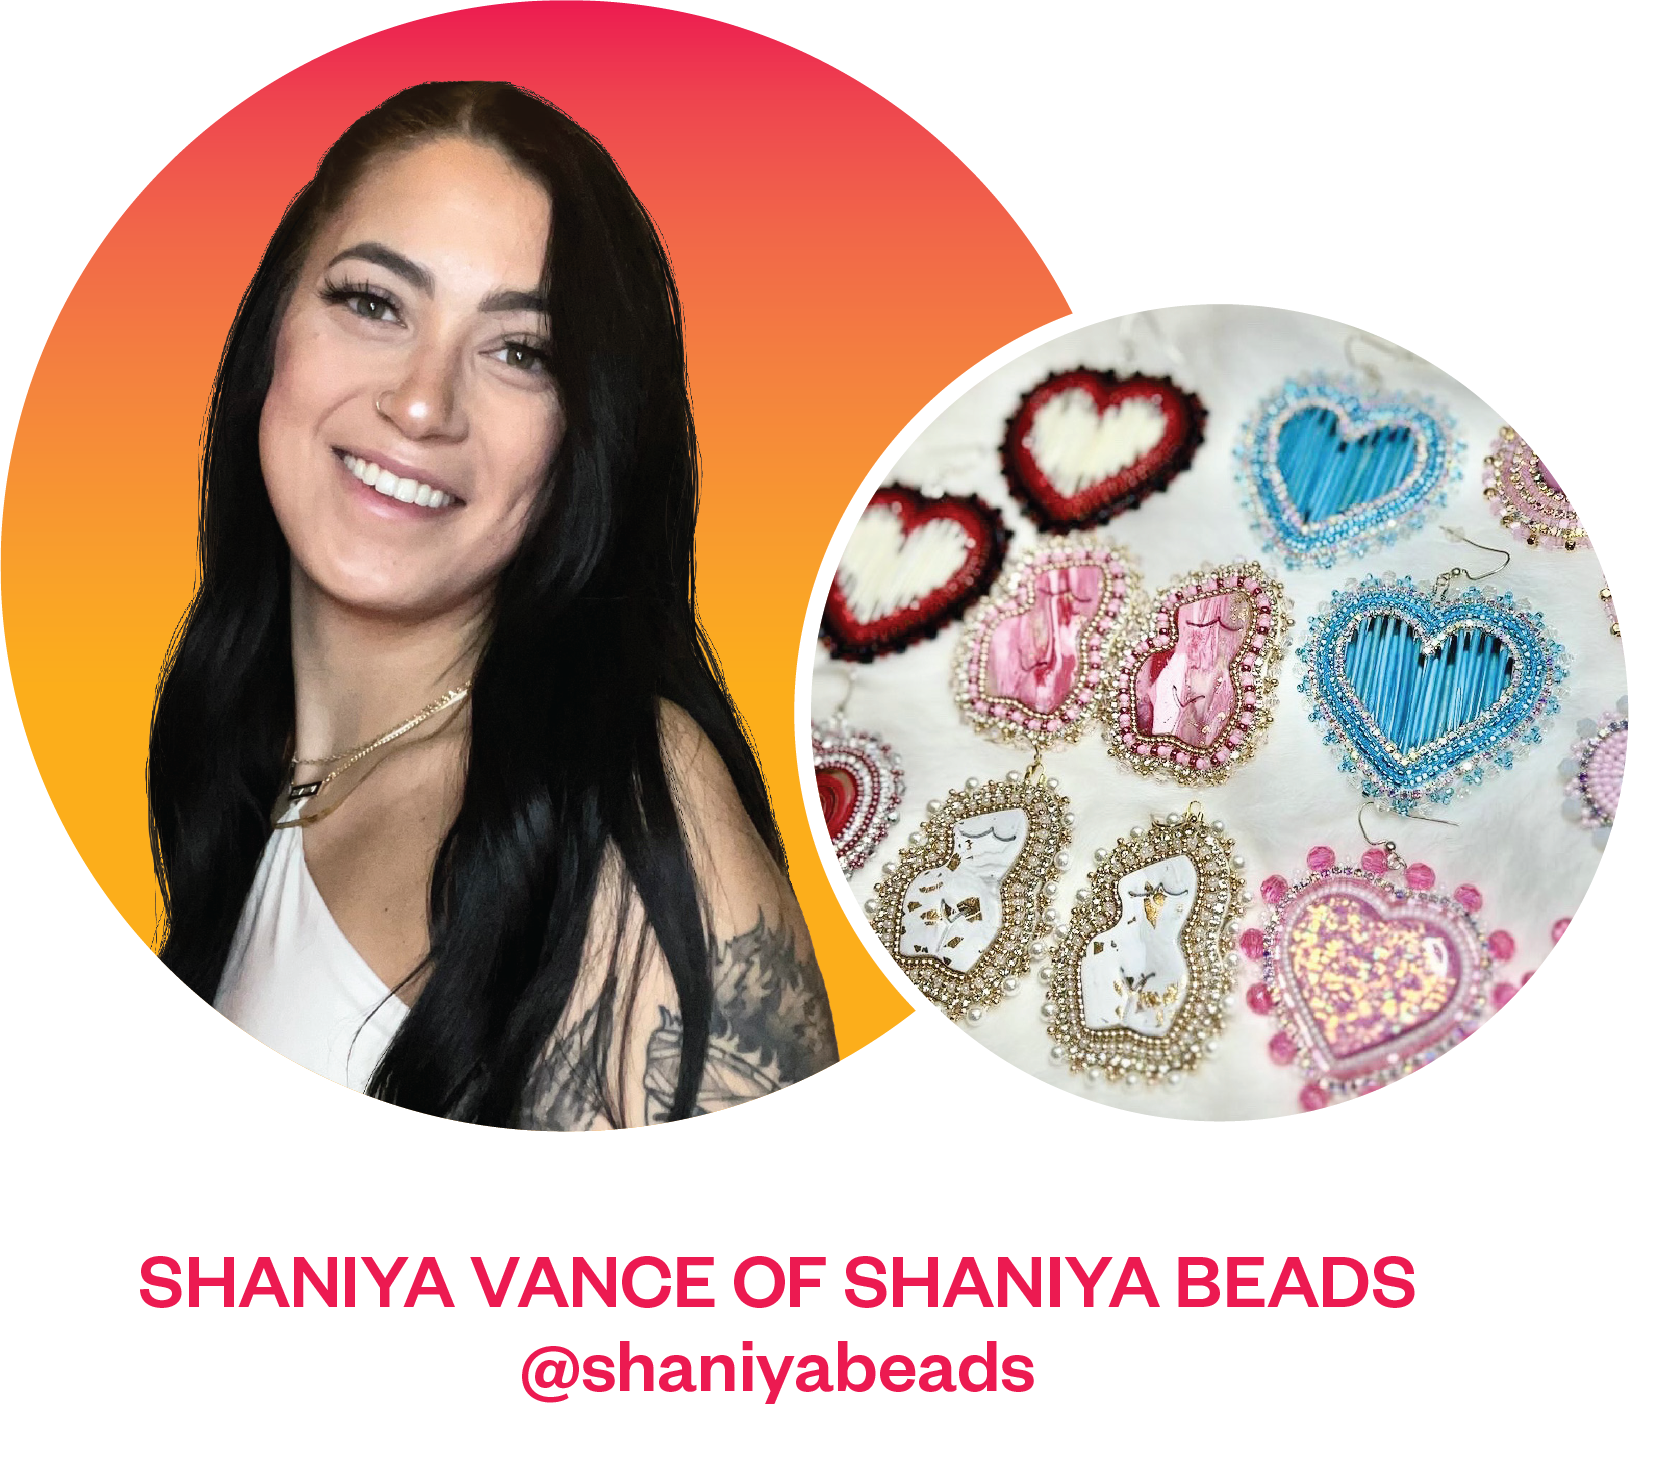 Circular image of Shaniya smiling with pink and orange background overlapped by circular image of her beaded earrings